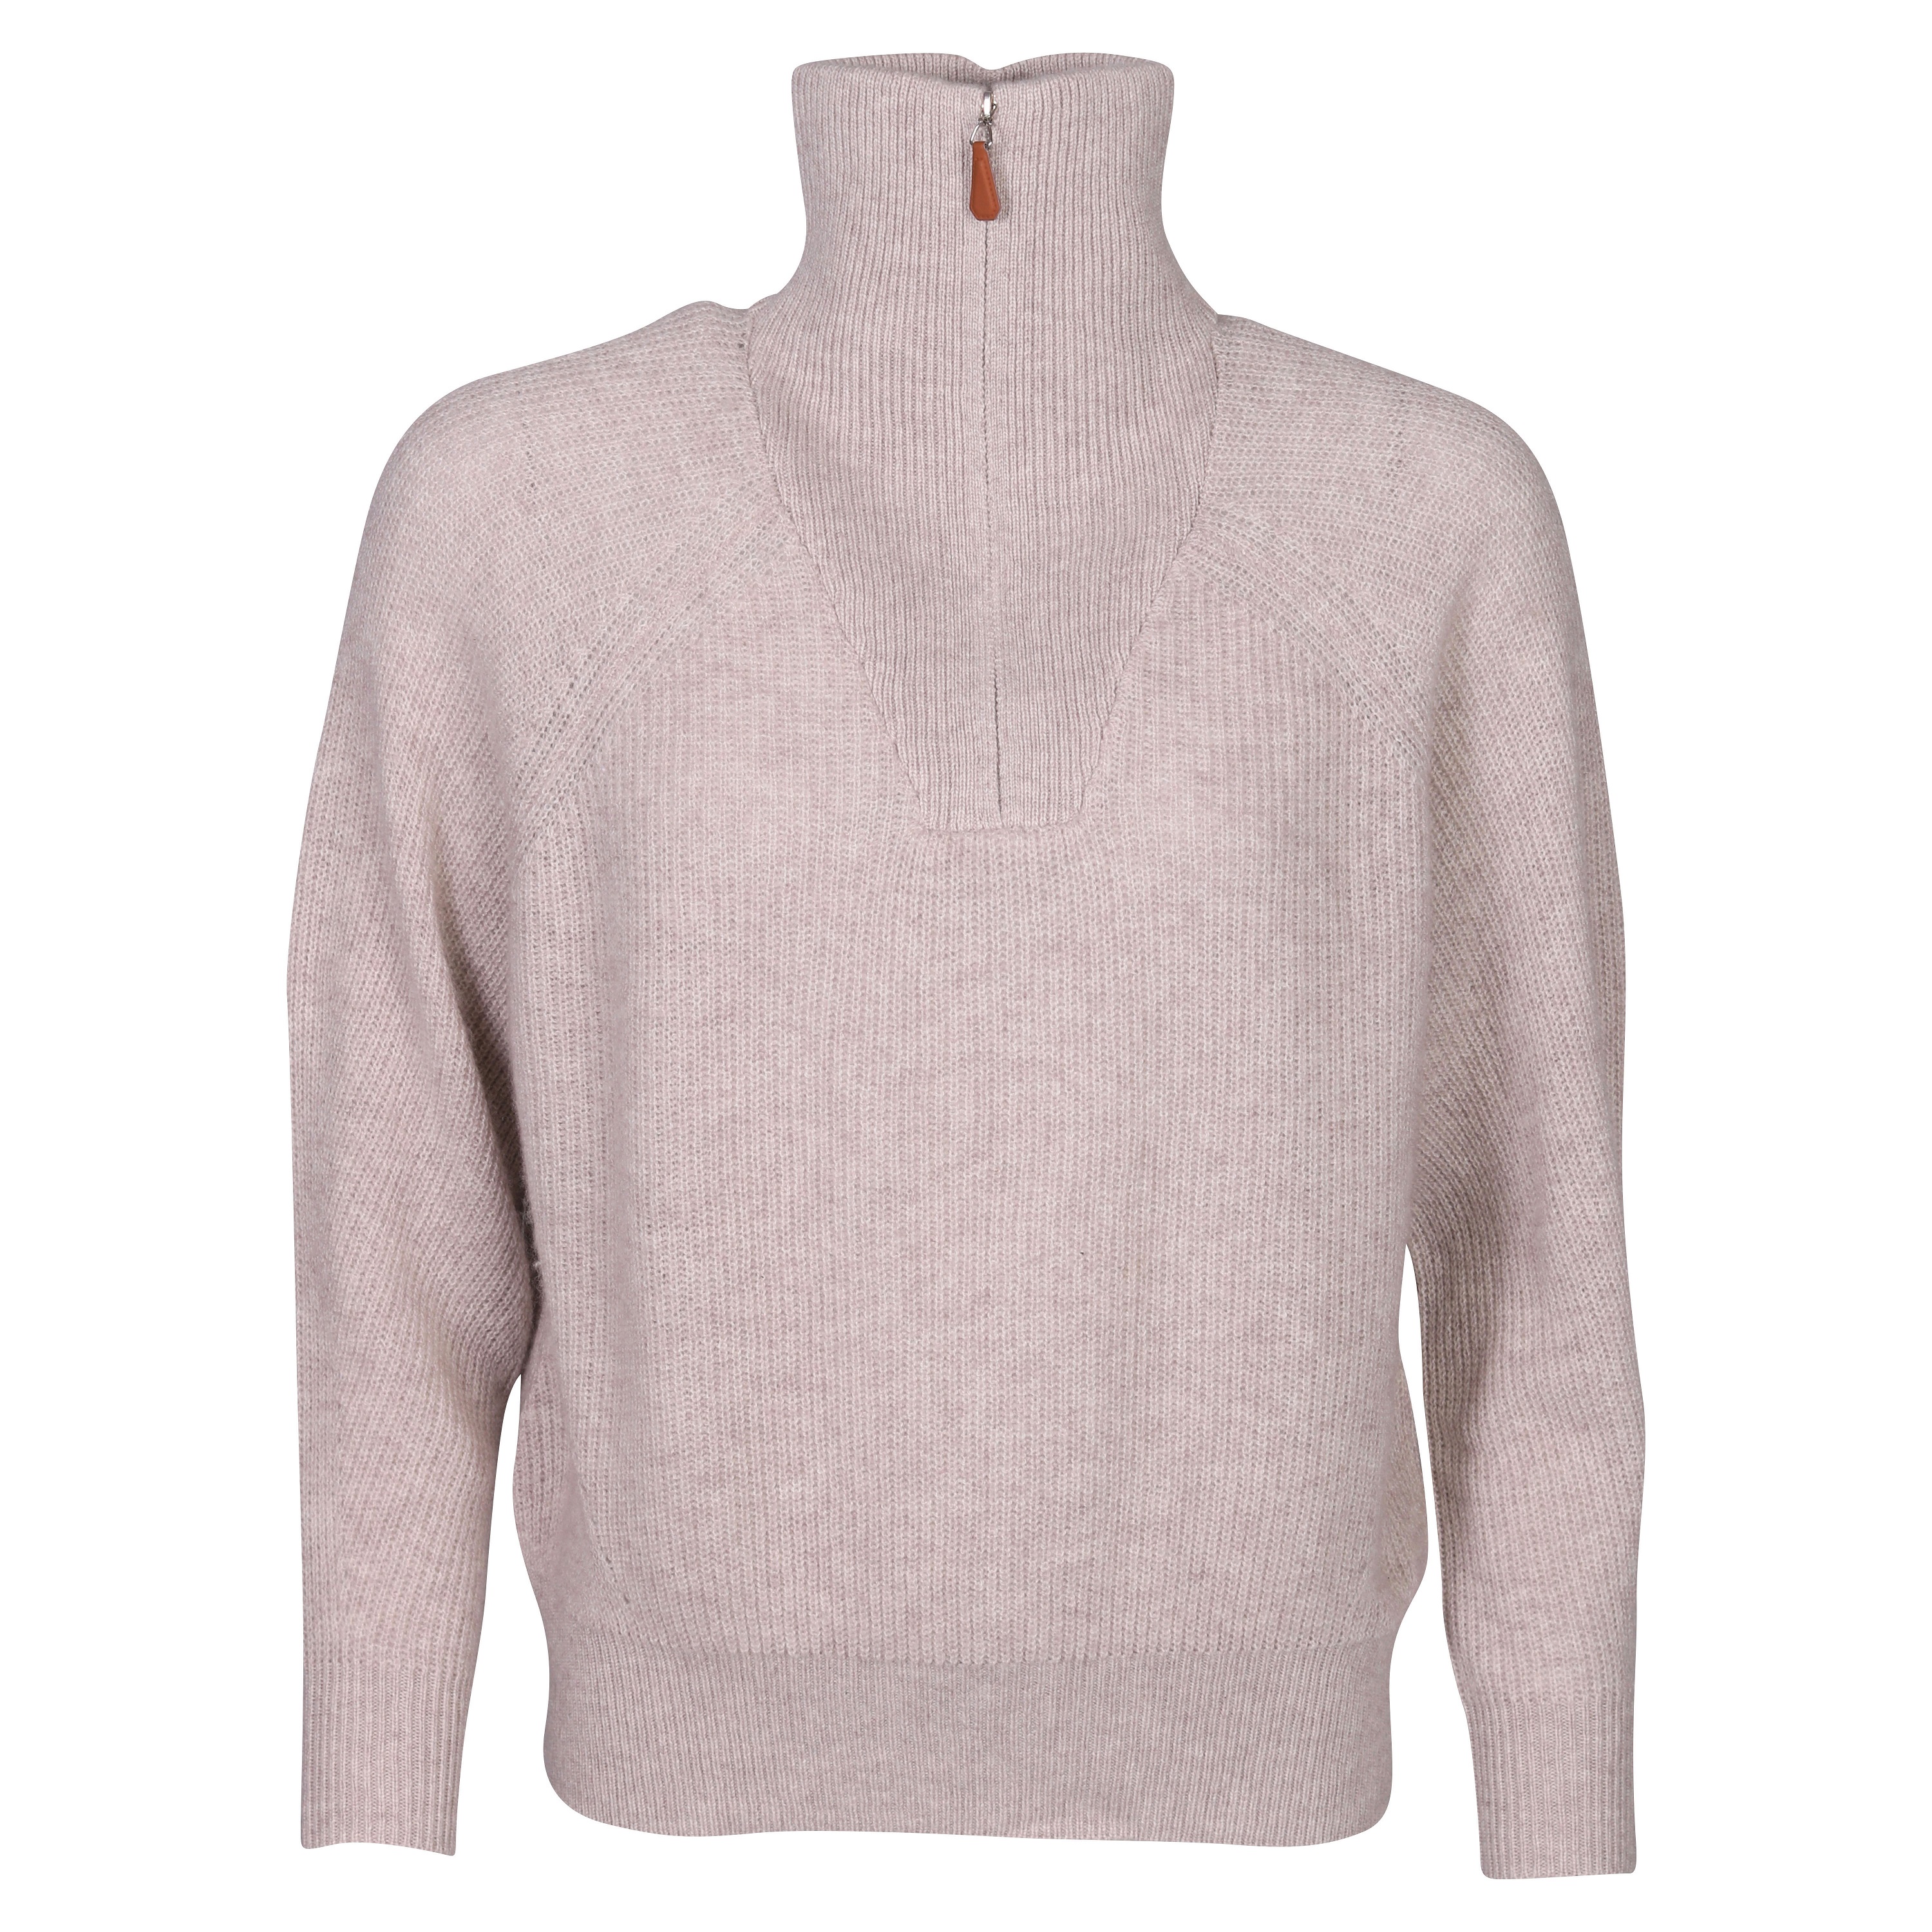 Flona Cashmere Pullover in Heather Mocha